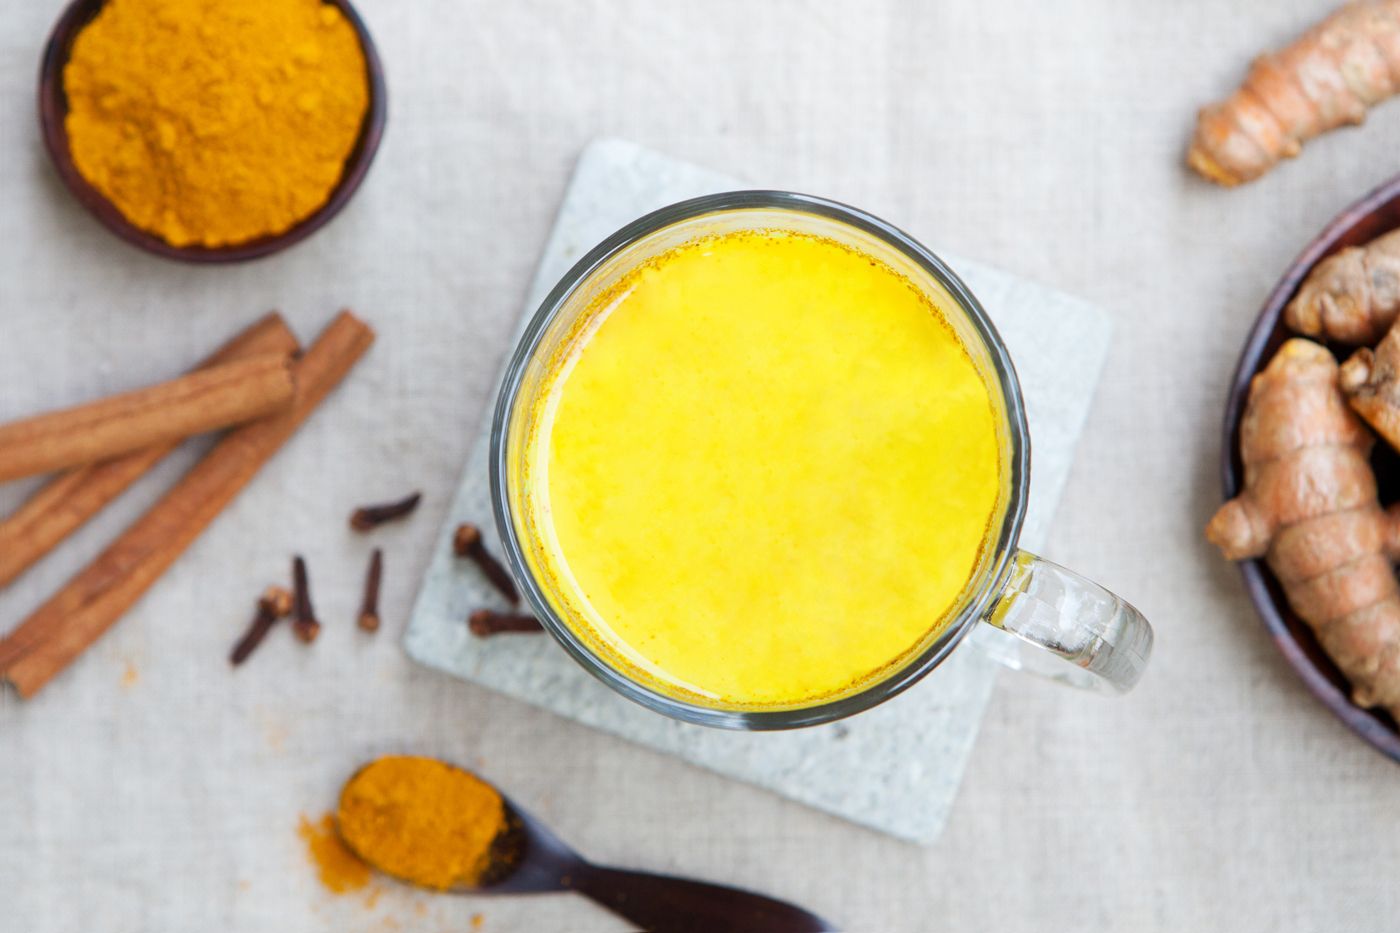 The turmeric latte recipe from 'Mean Girls'-inspired 'The Burn Cookbook'